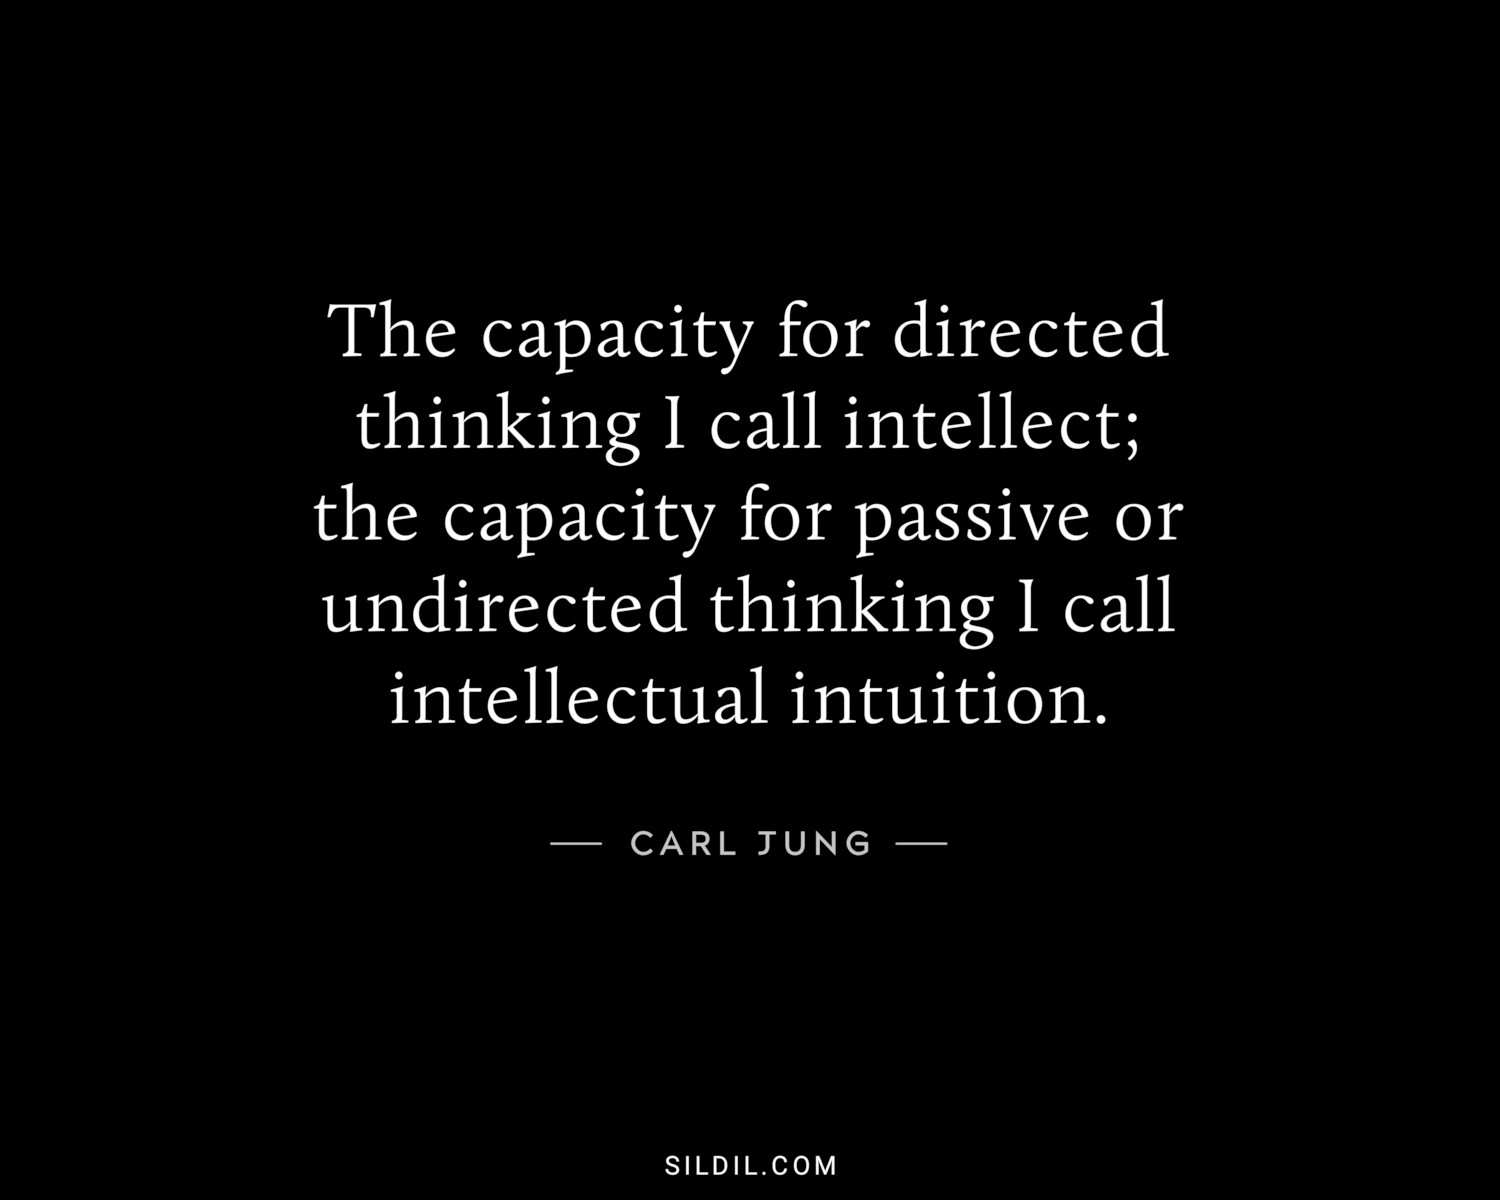 The capacity for directed thinking I call intellect; the capacity for passive or undirected thinking I call intellectual intuition.